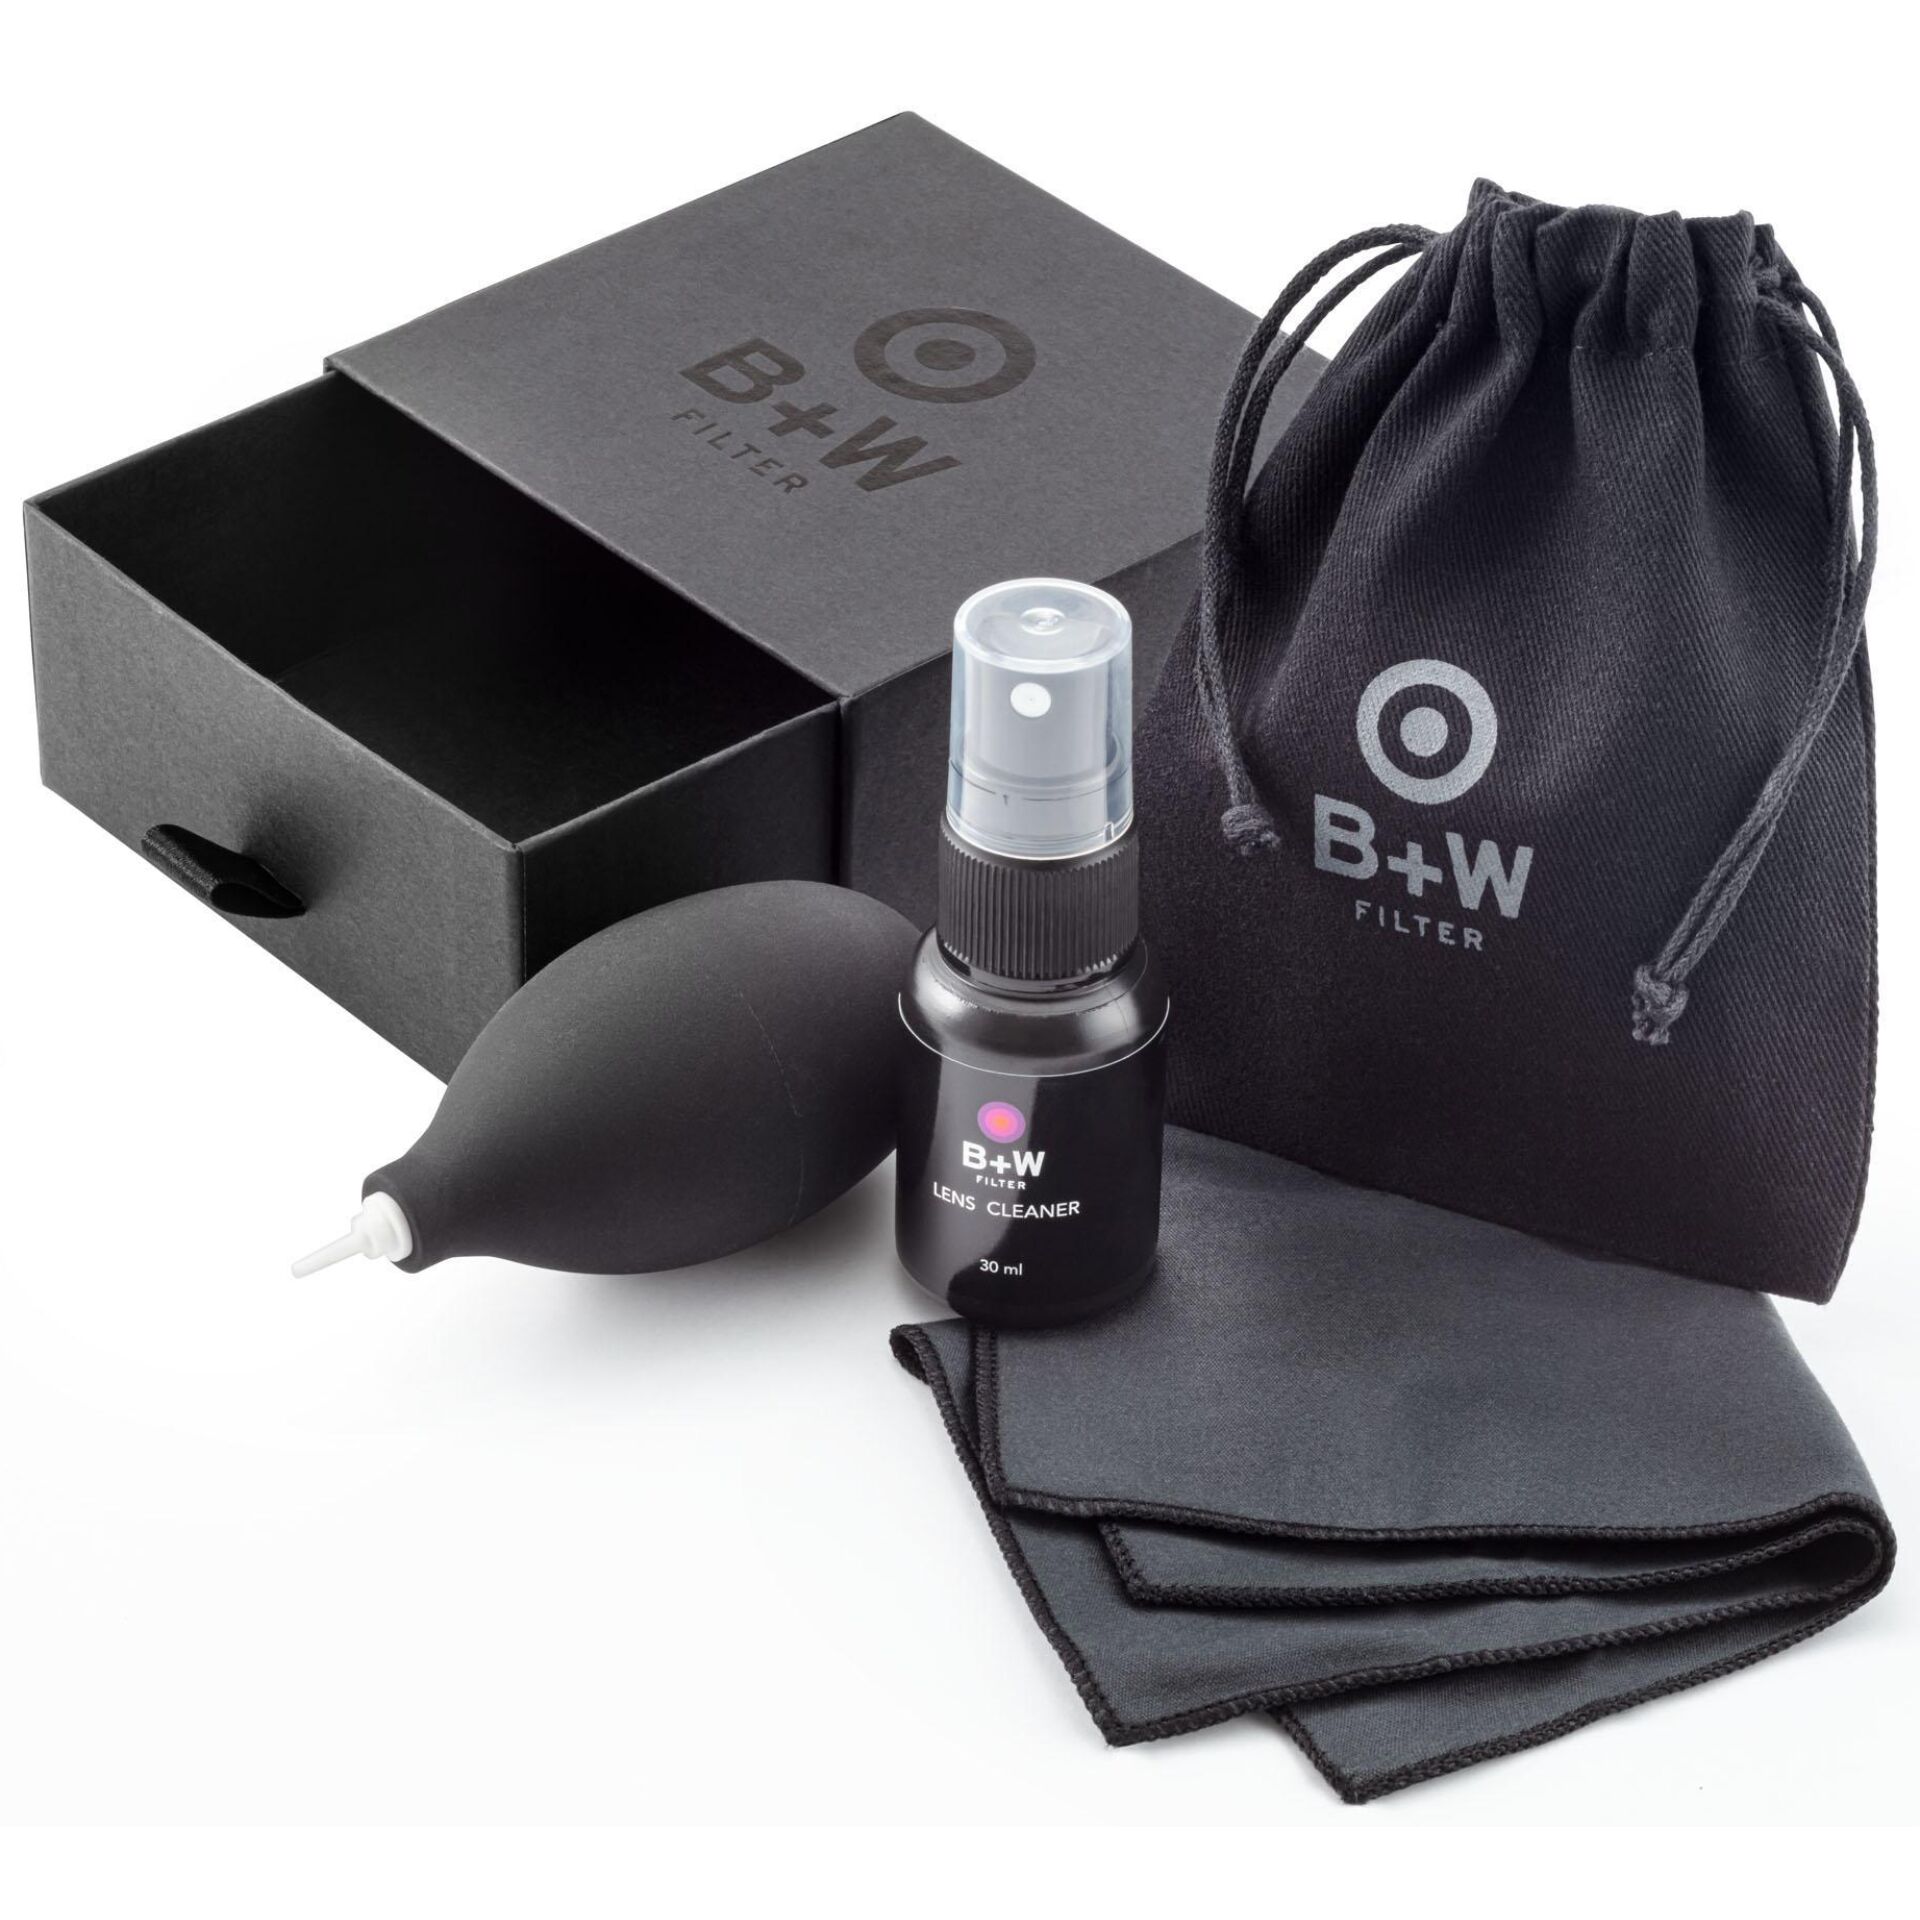 B+W Travel Cleaning Set for Filter & lens